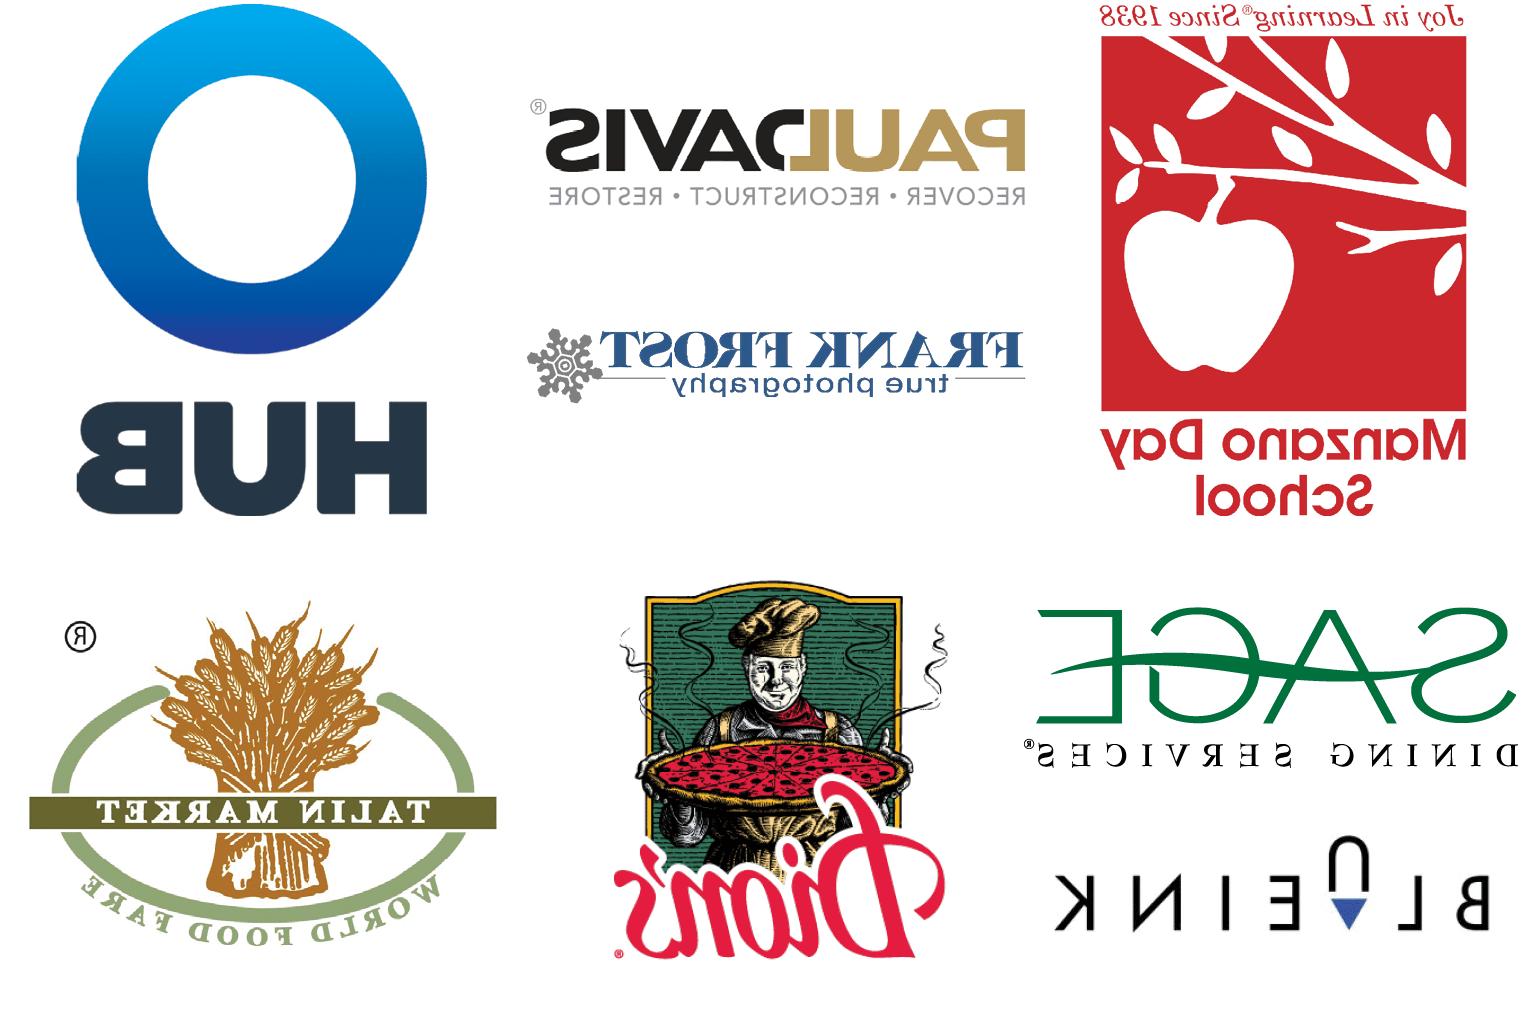 Collage of various corporate and educational logos.